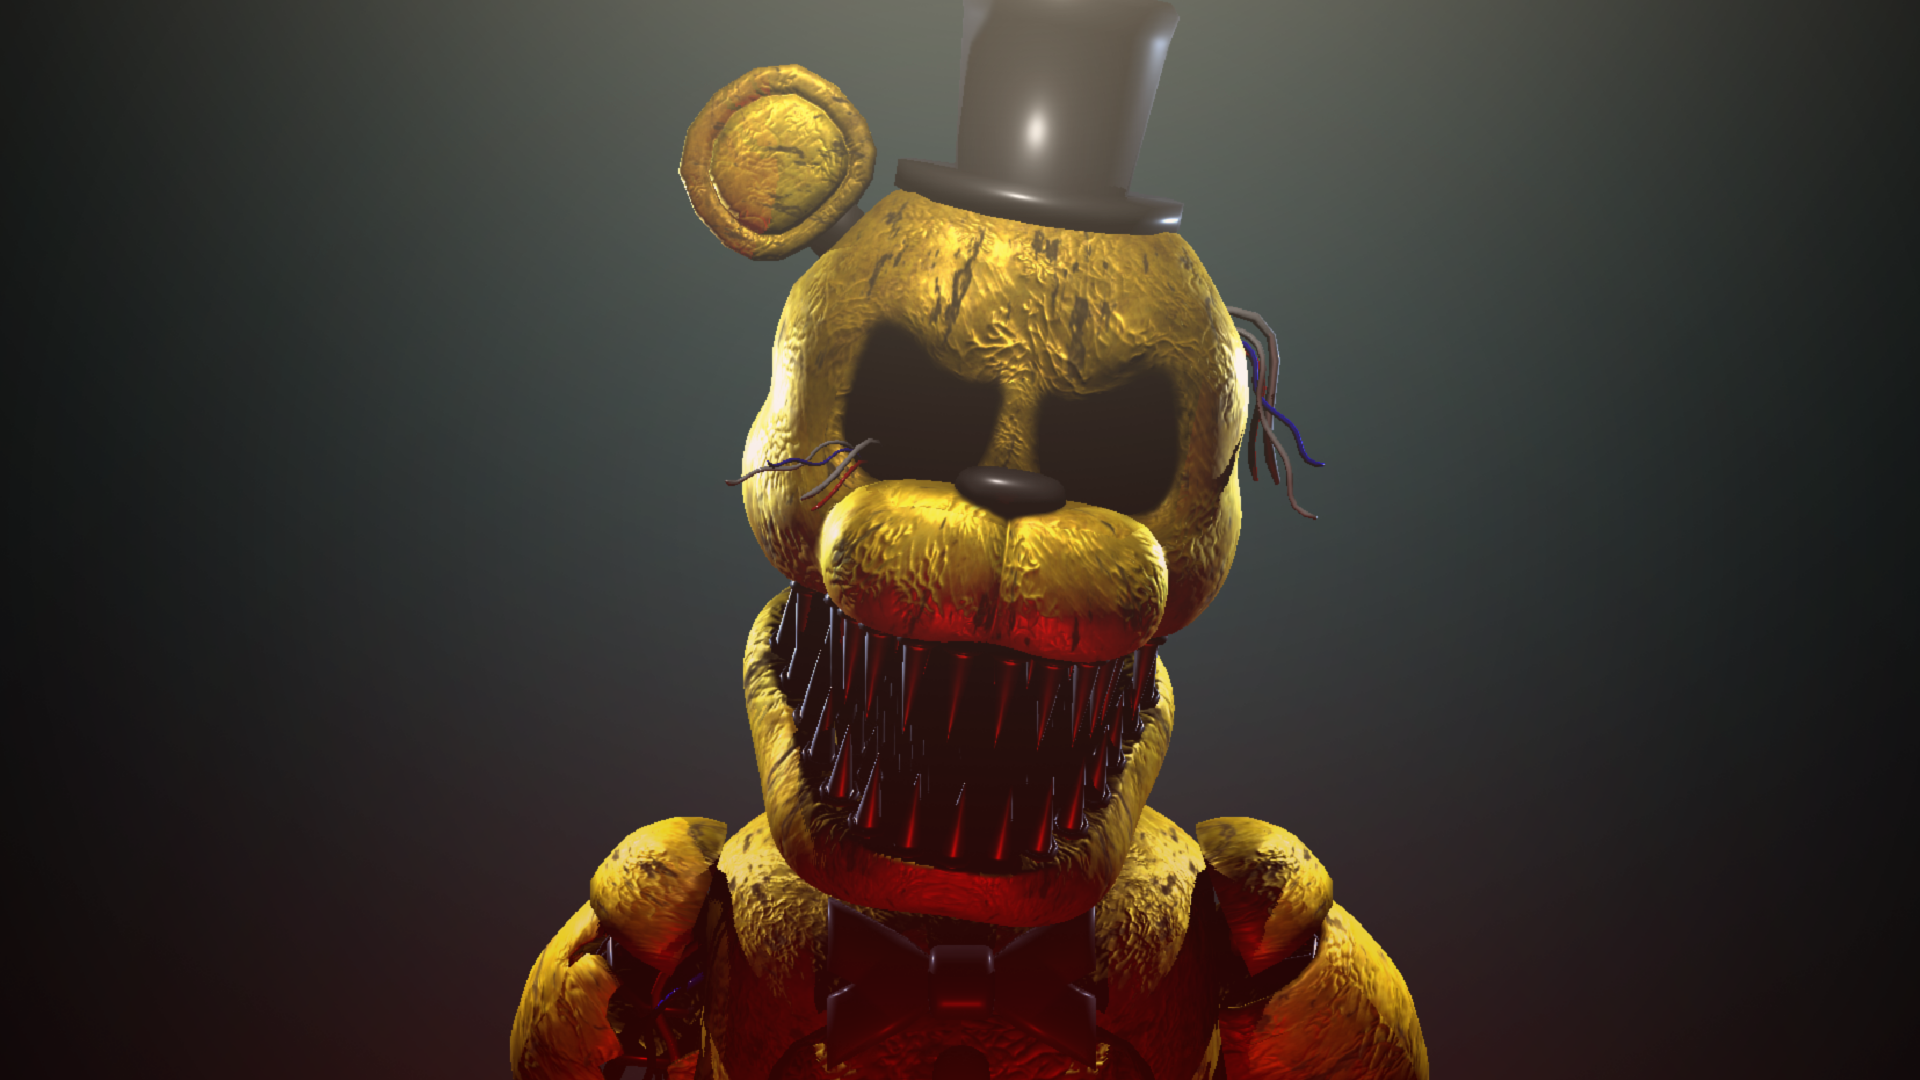 Sinister Springtrap Wallpapers - Wallpaper Cave.